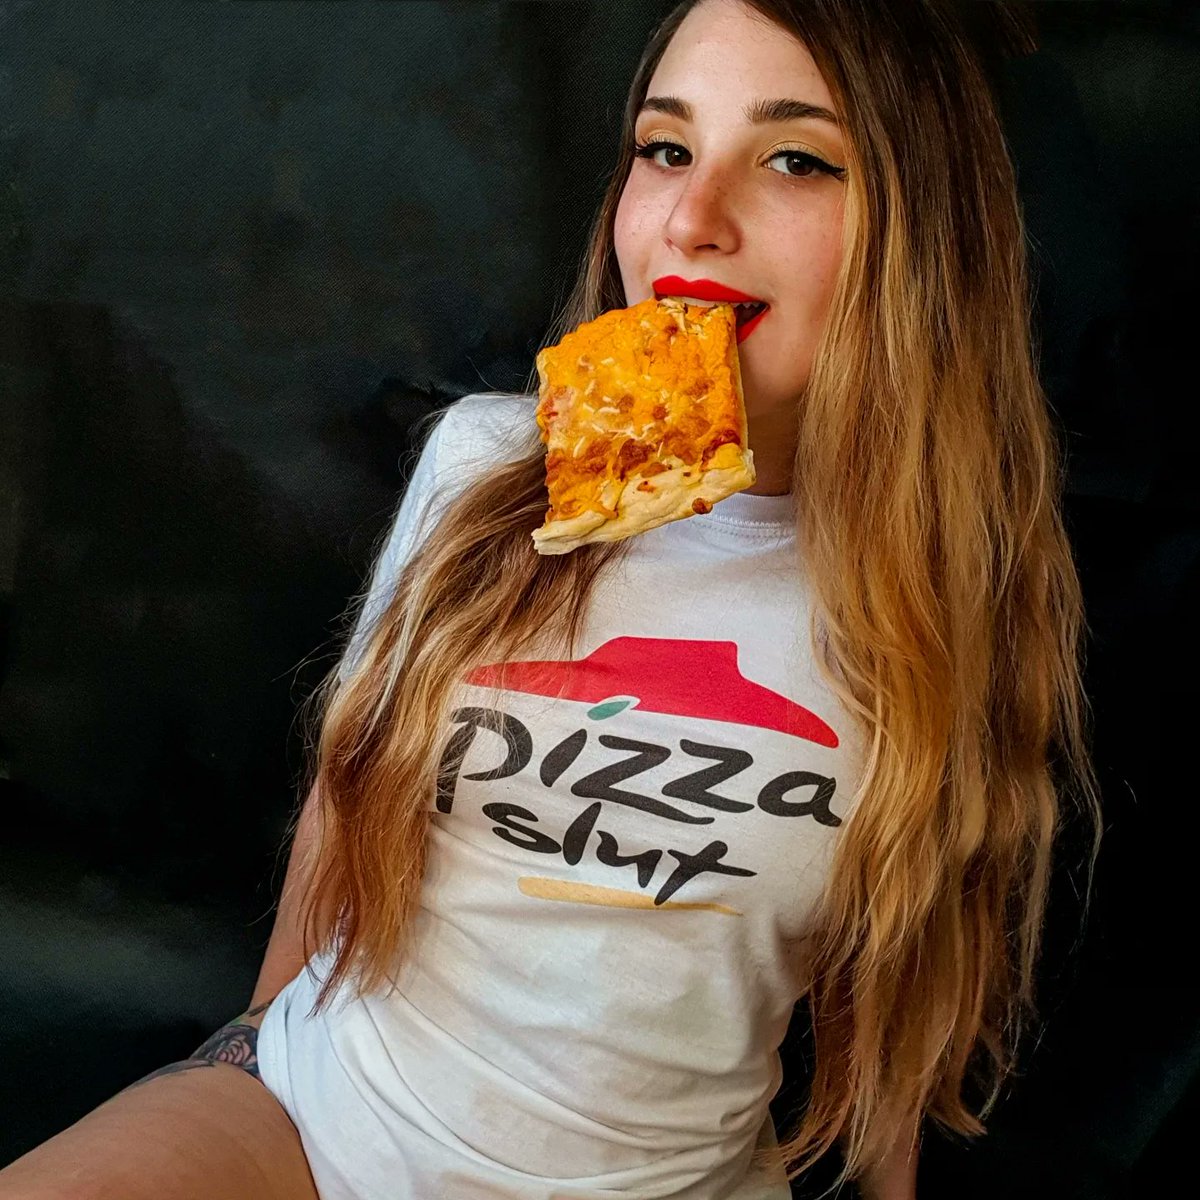 Another 🔥 @monthlyteeclub shirt,
It sums me up perfectly 🍕